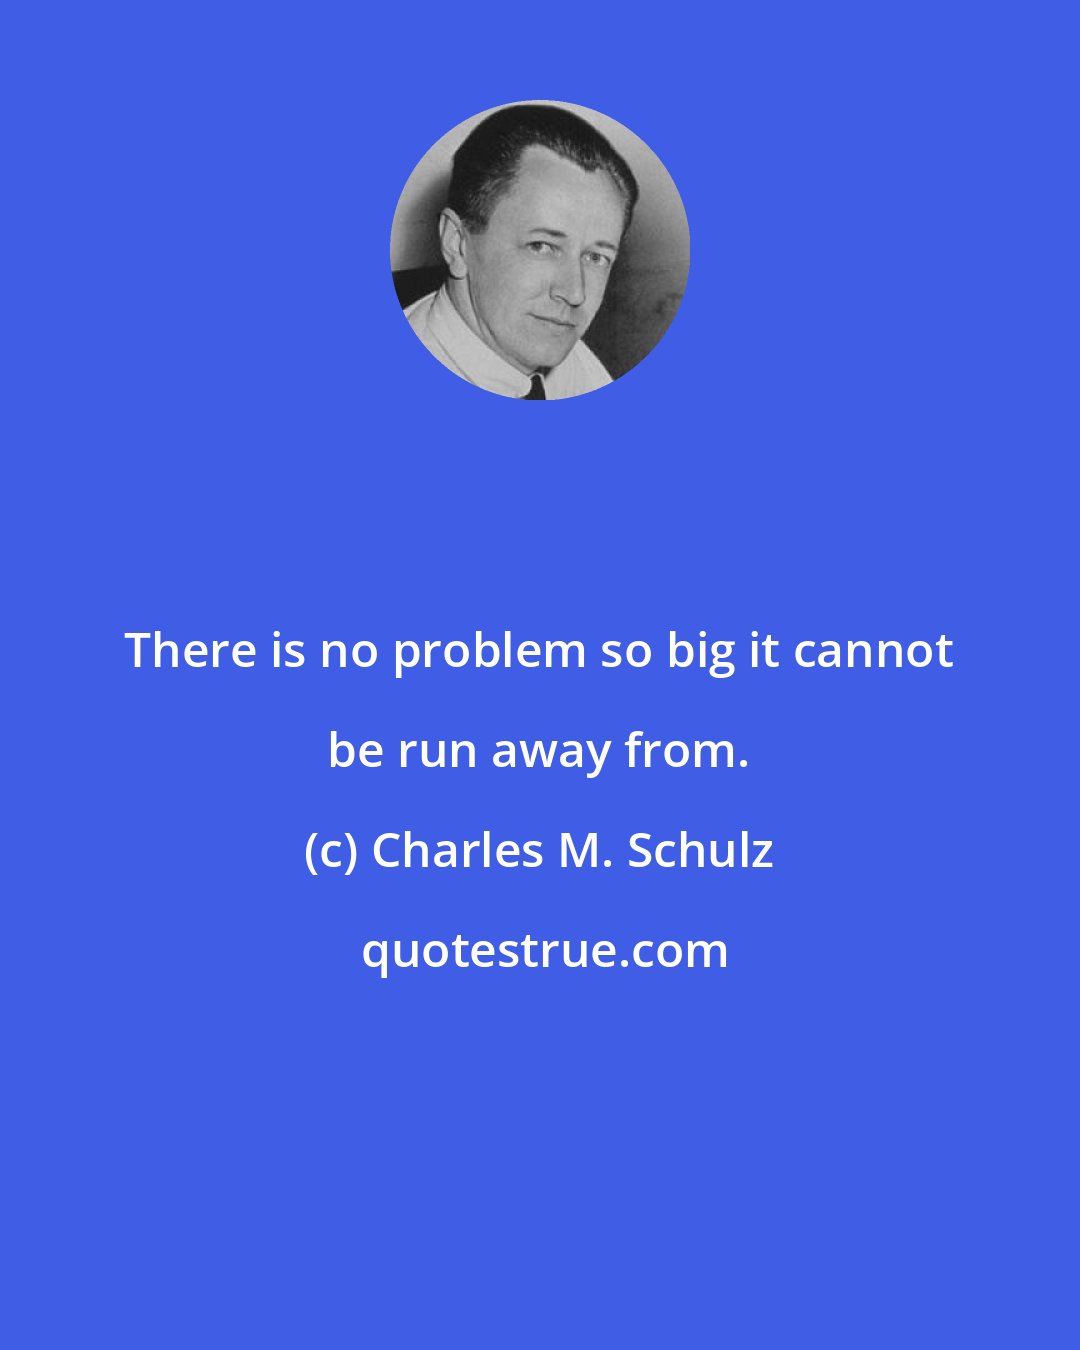 Charles M. Schulz: There is no problem so big it cannot be run away from.